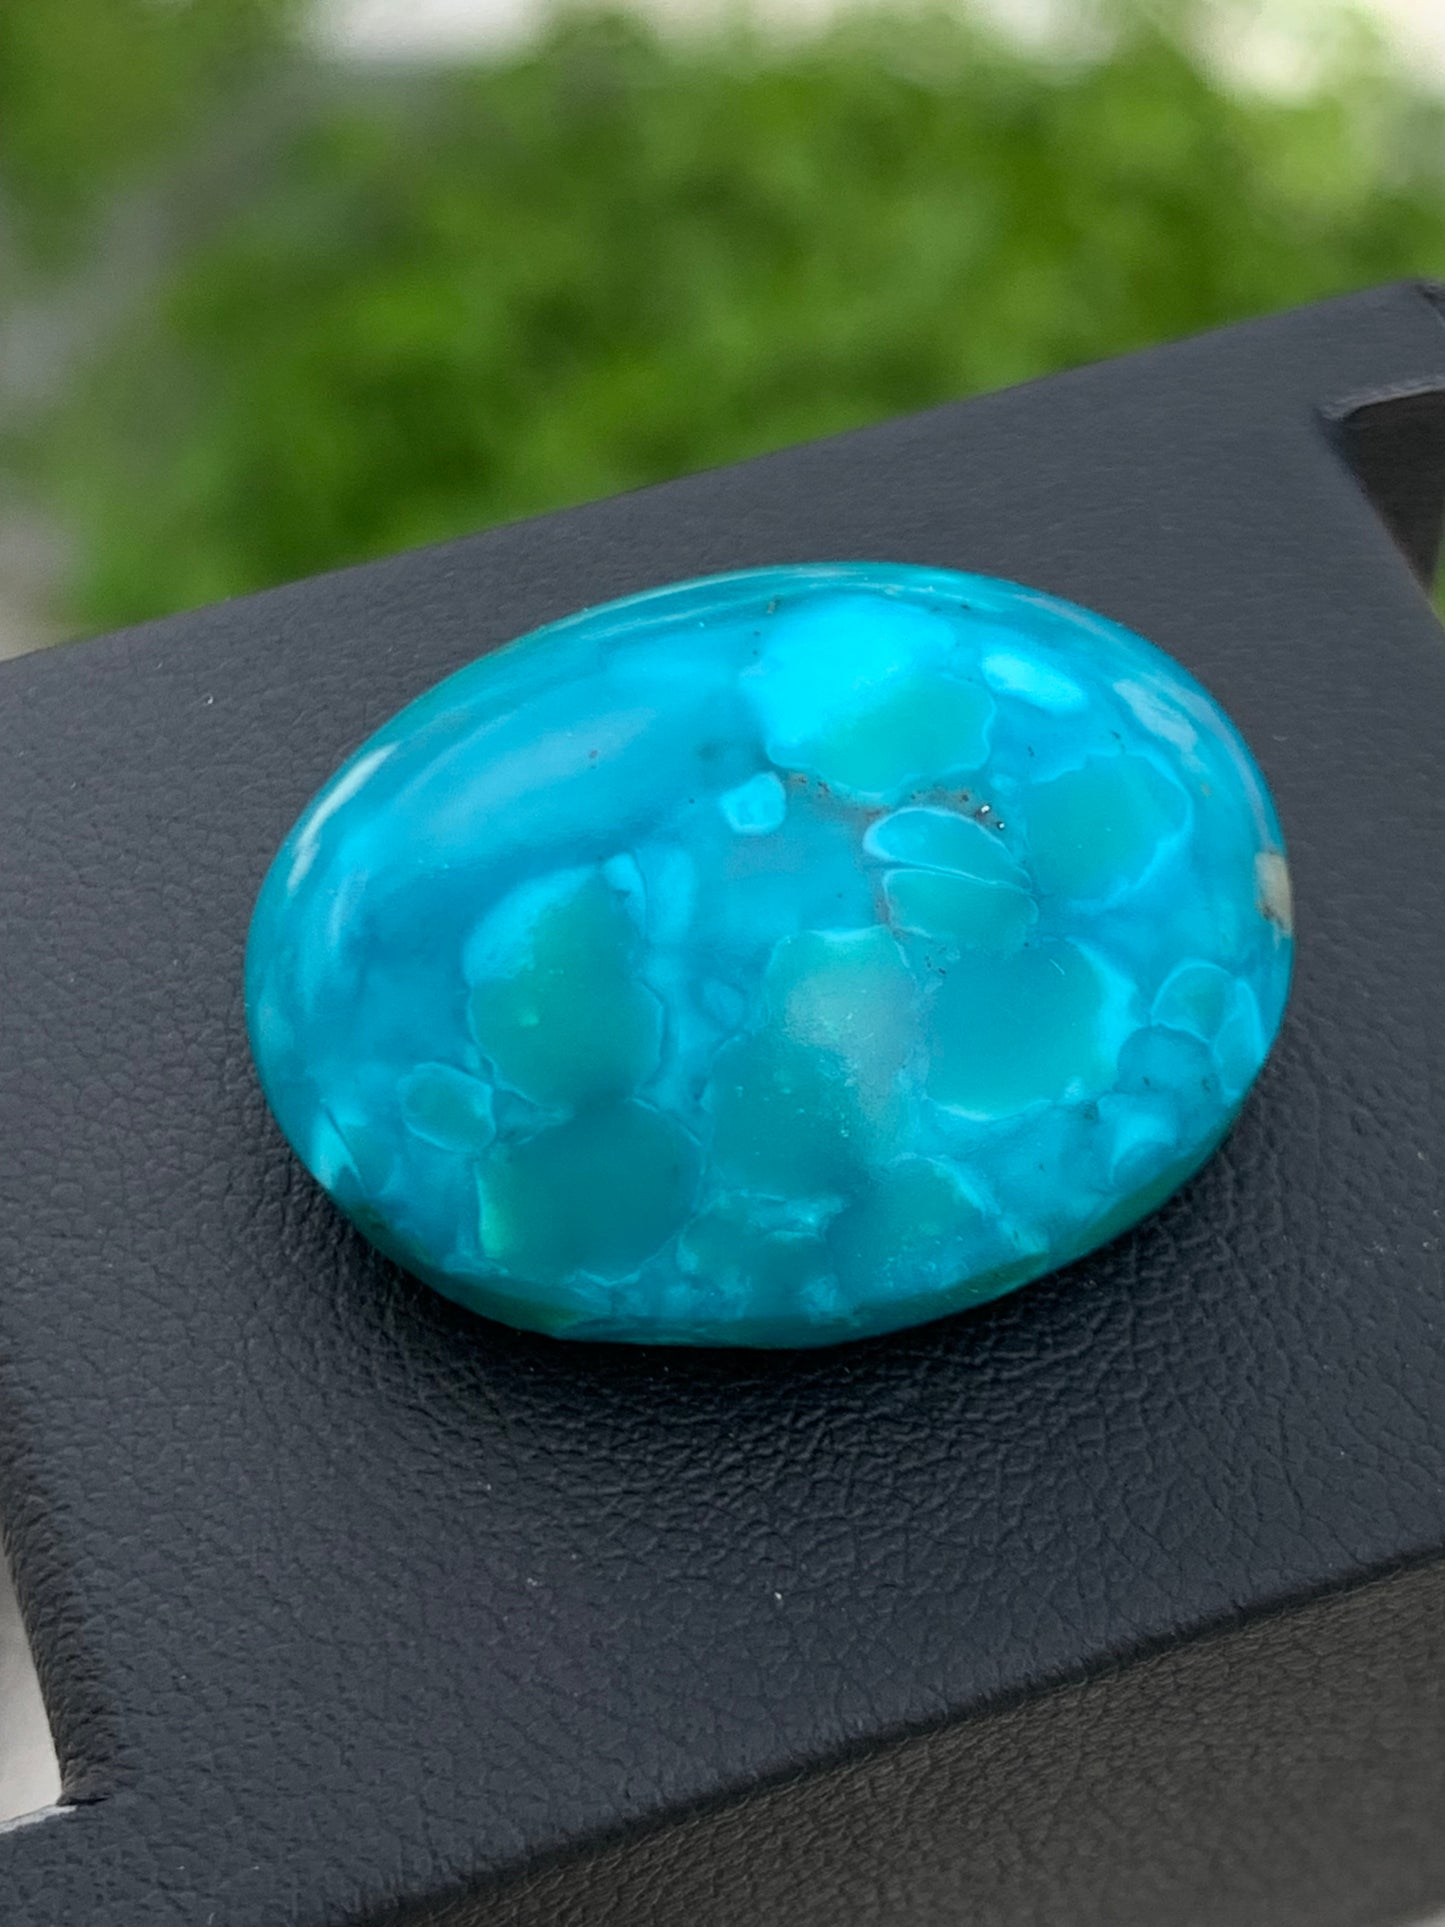 Rare Natural Persian Turquoise Gemstone from Afghanistan- 47.41 Carat Oval Cut  - High quality Oval Cut, Sky Blue Clean Gemstone